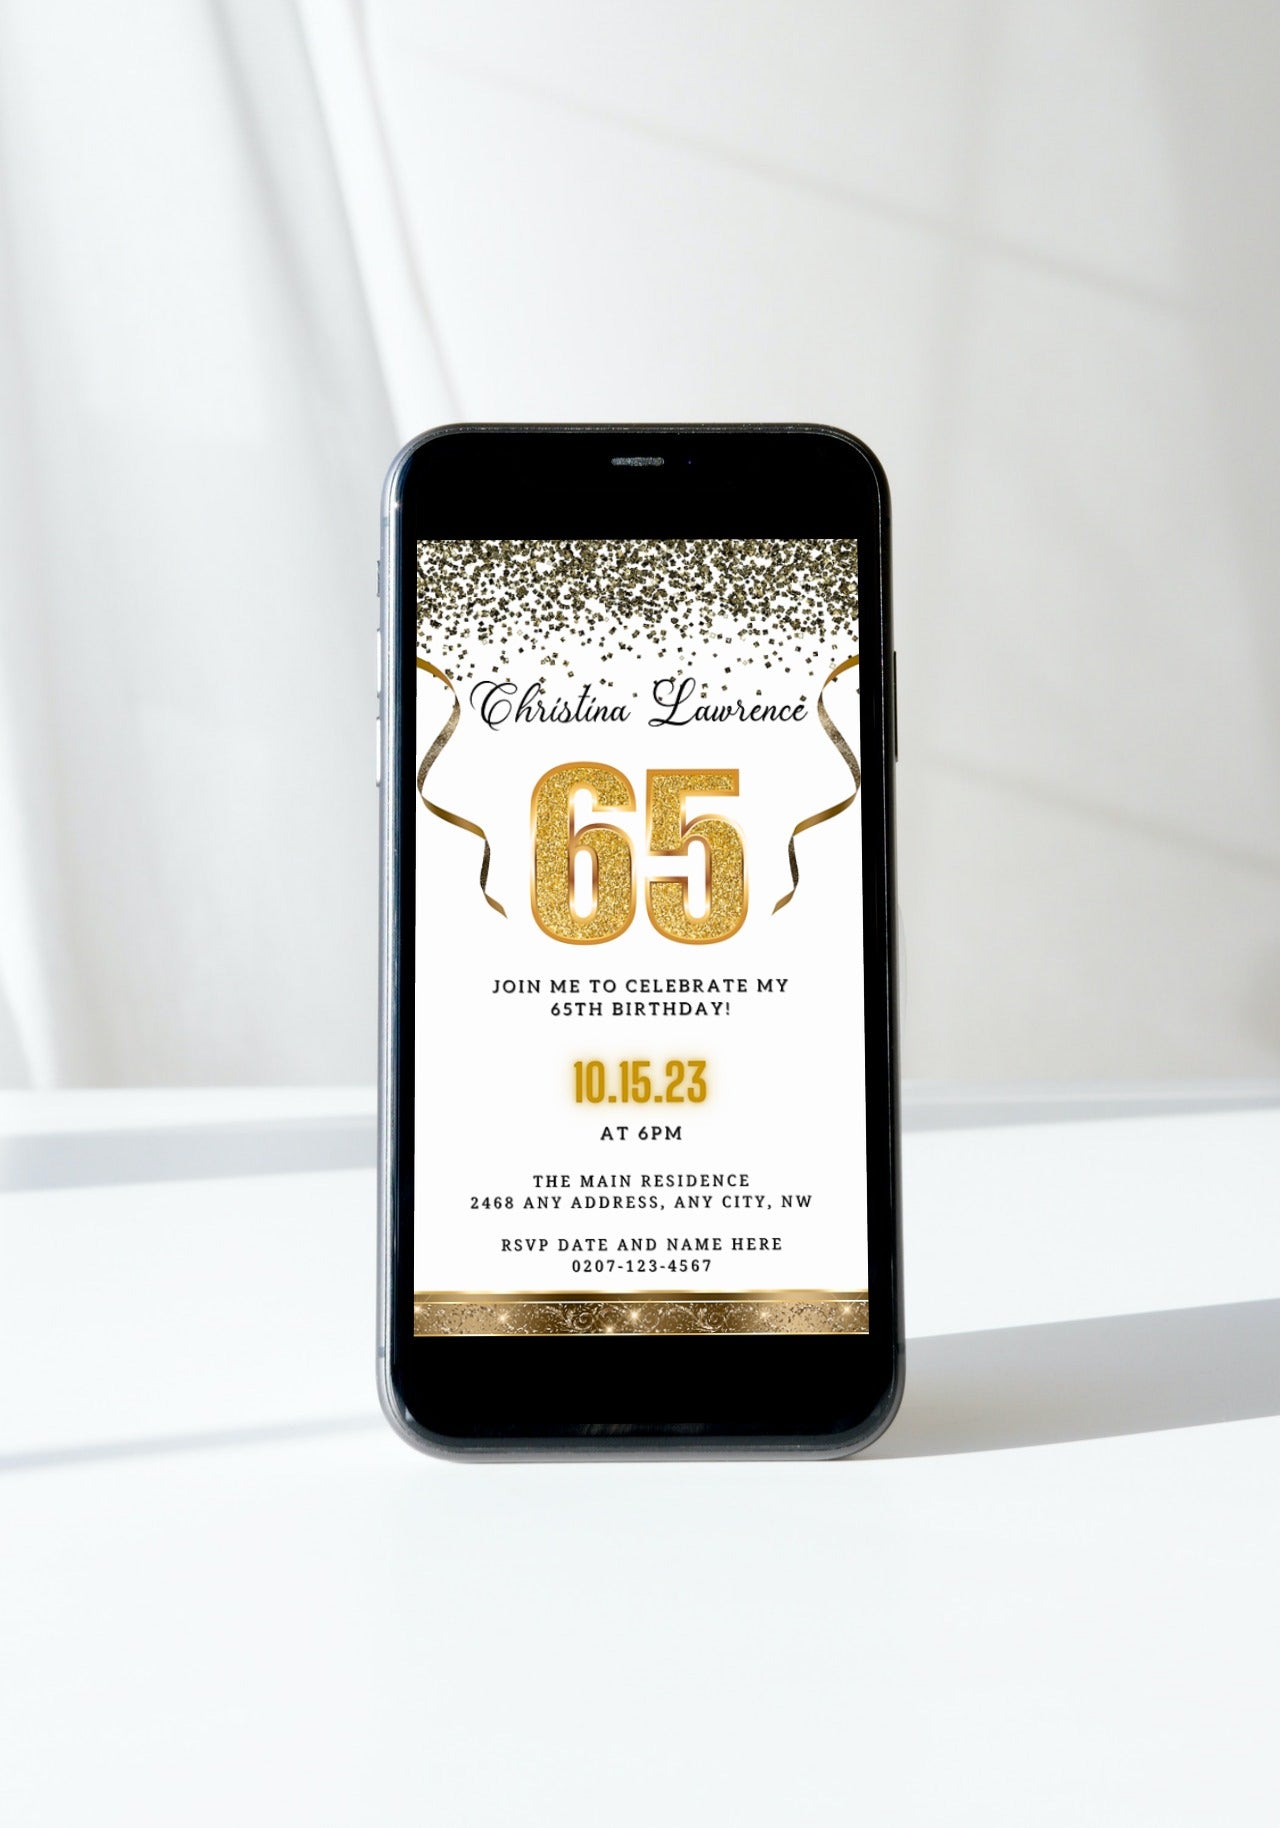 White Gold Confetti 65th Birthday Evite displayed on a smartphone with gold text and ribbon accents, showcasing a customizable digital invitation template.